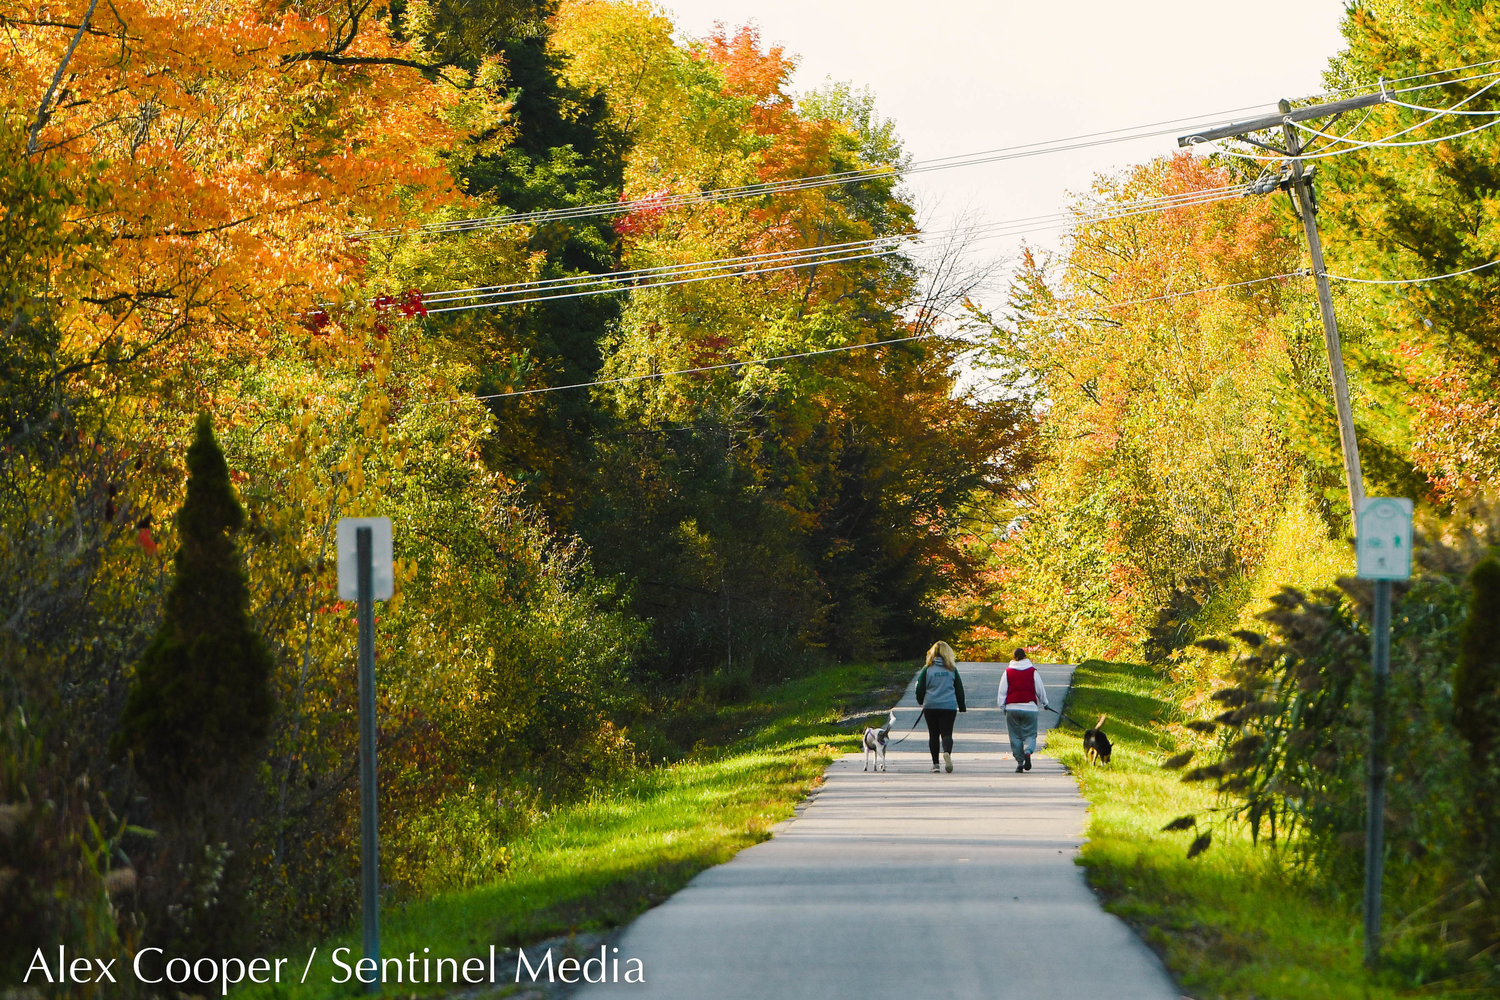 Sunlight hits autumn leaves as two women walk their dogs along Philip A. Rayhill Memorial Recreational Trail in New Hartford.